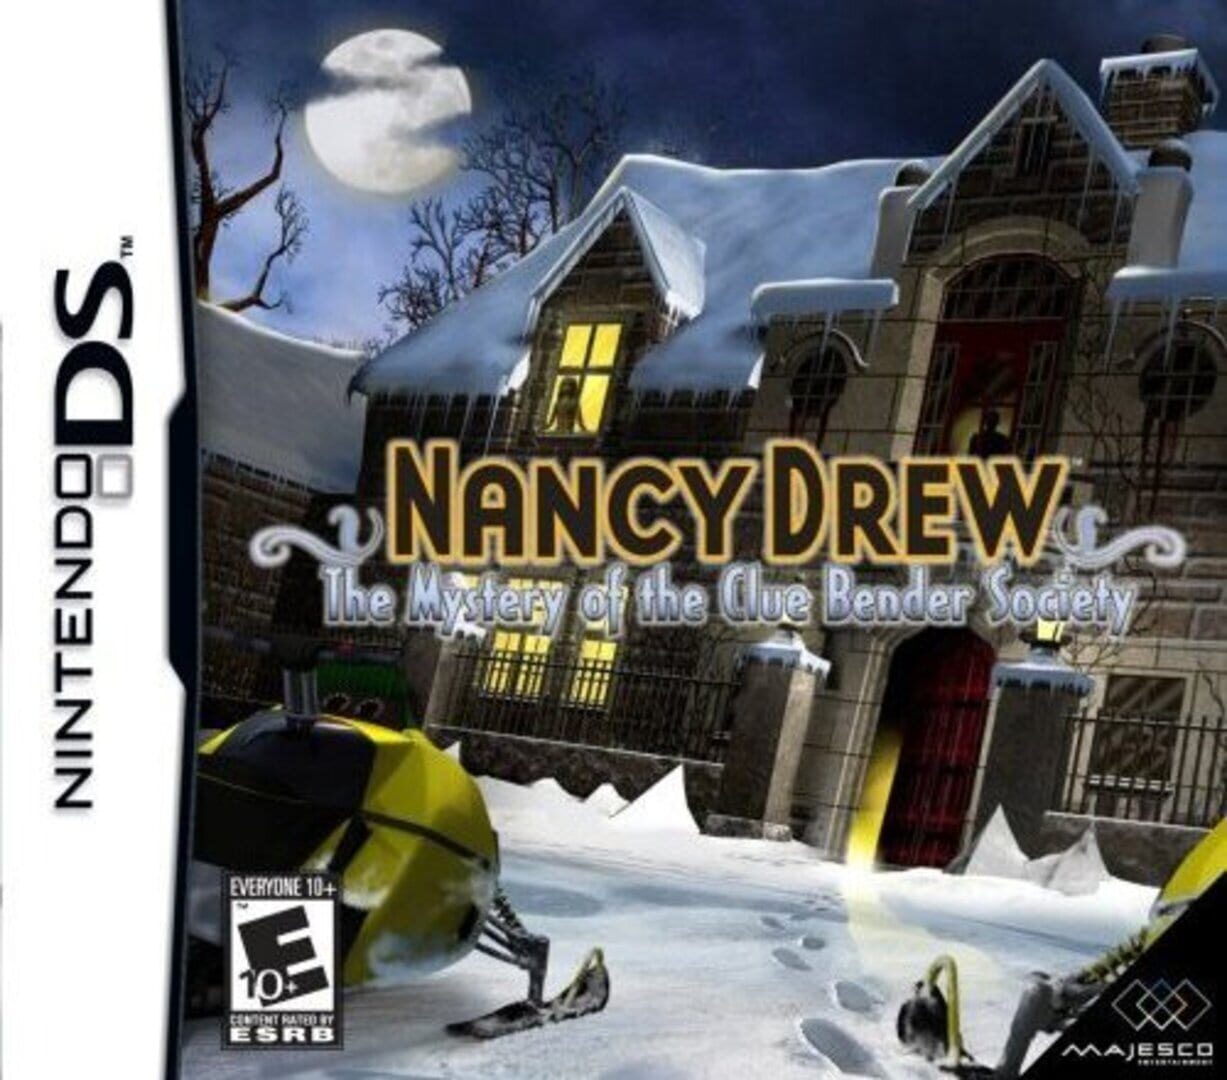 game-nancy-drew-the-mystery-of-the-clue-bender-society-2008-release-date-trailers-system